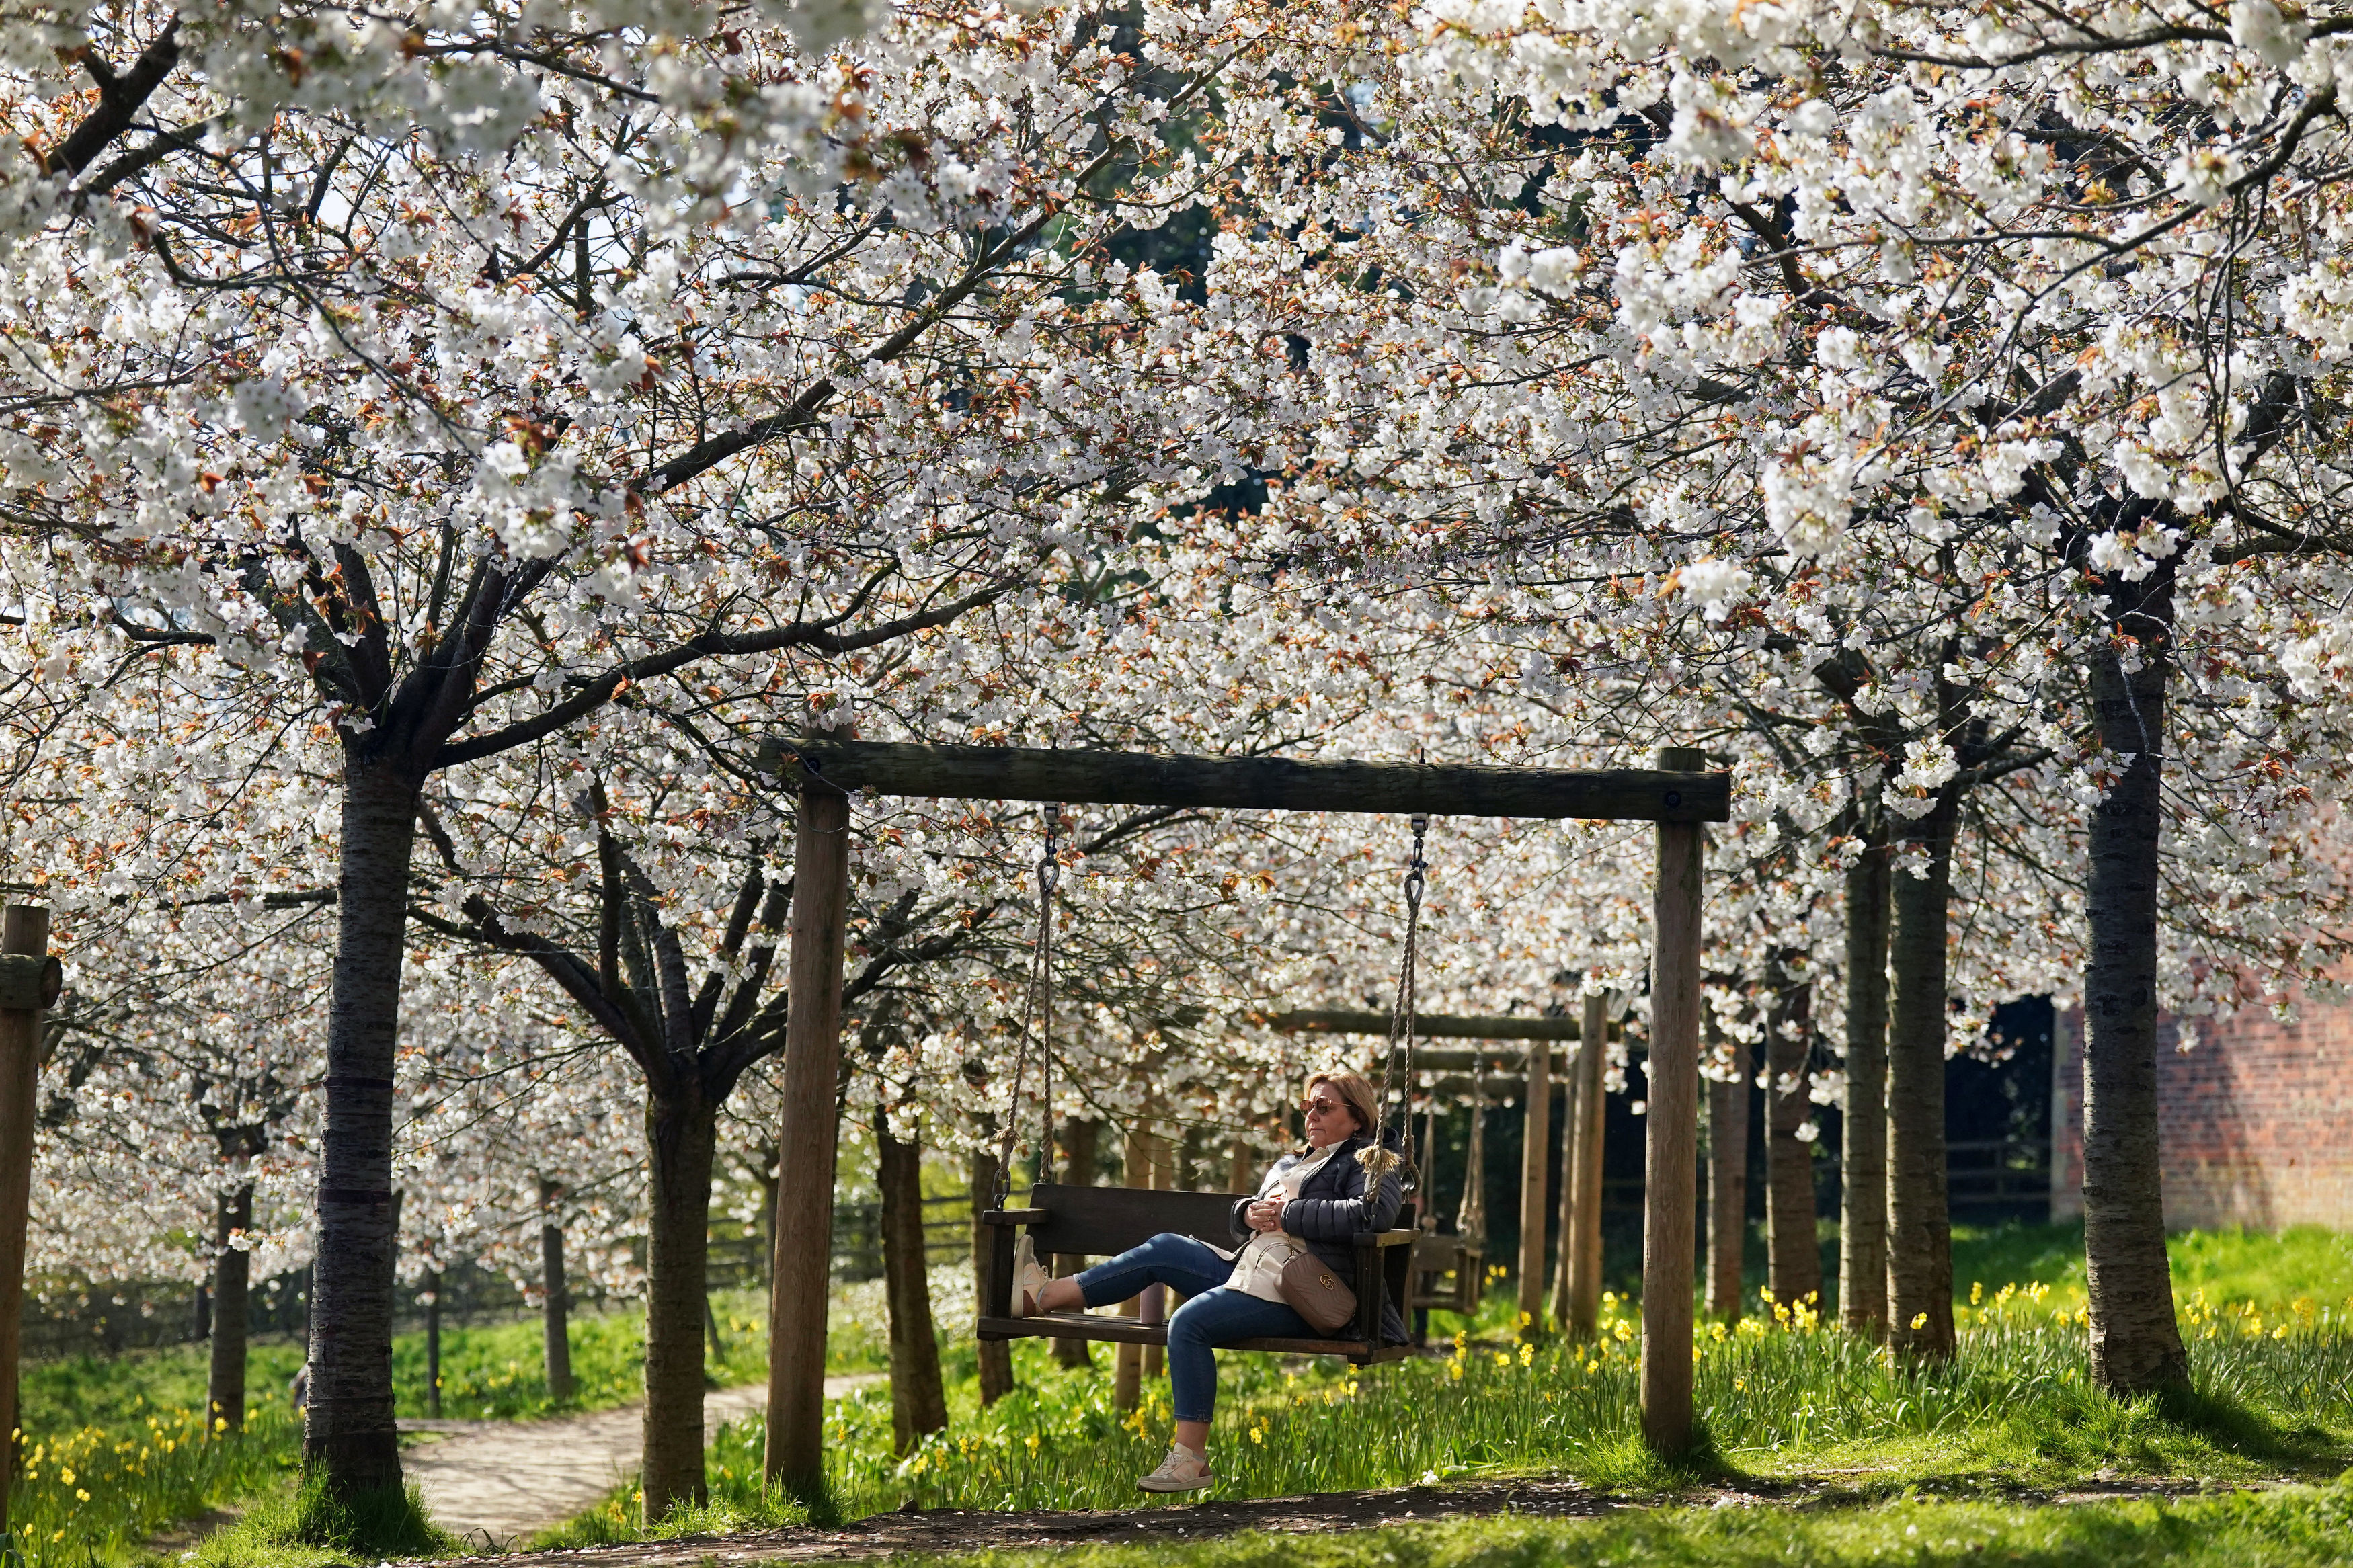 The Alnwick Garden's Japanese cherry orchard is the largest in the world